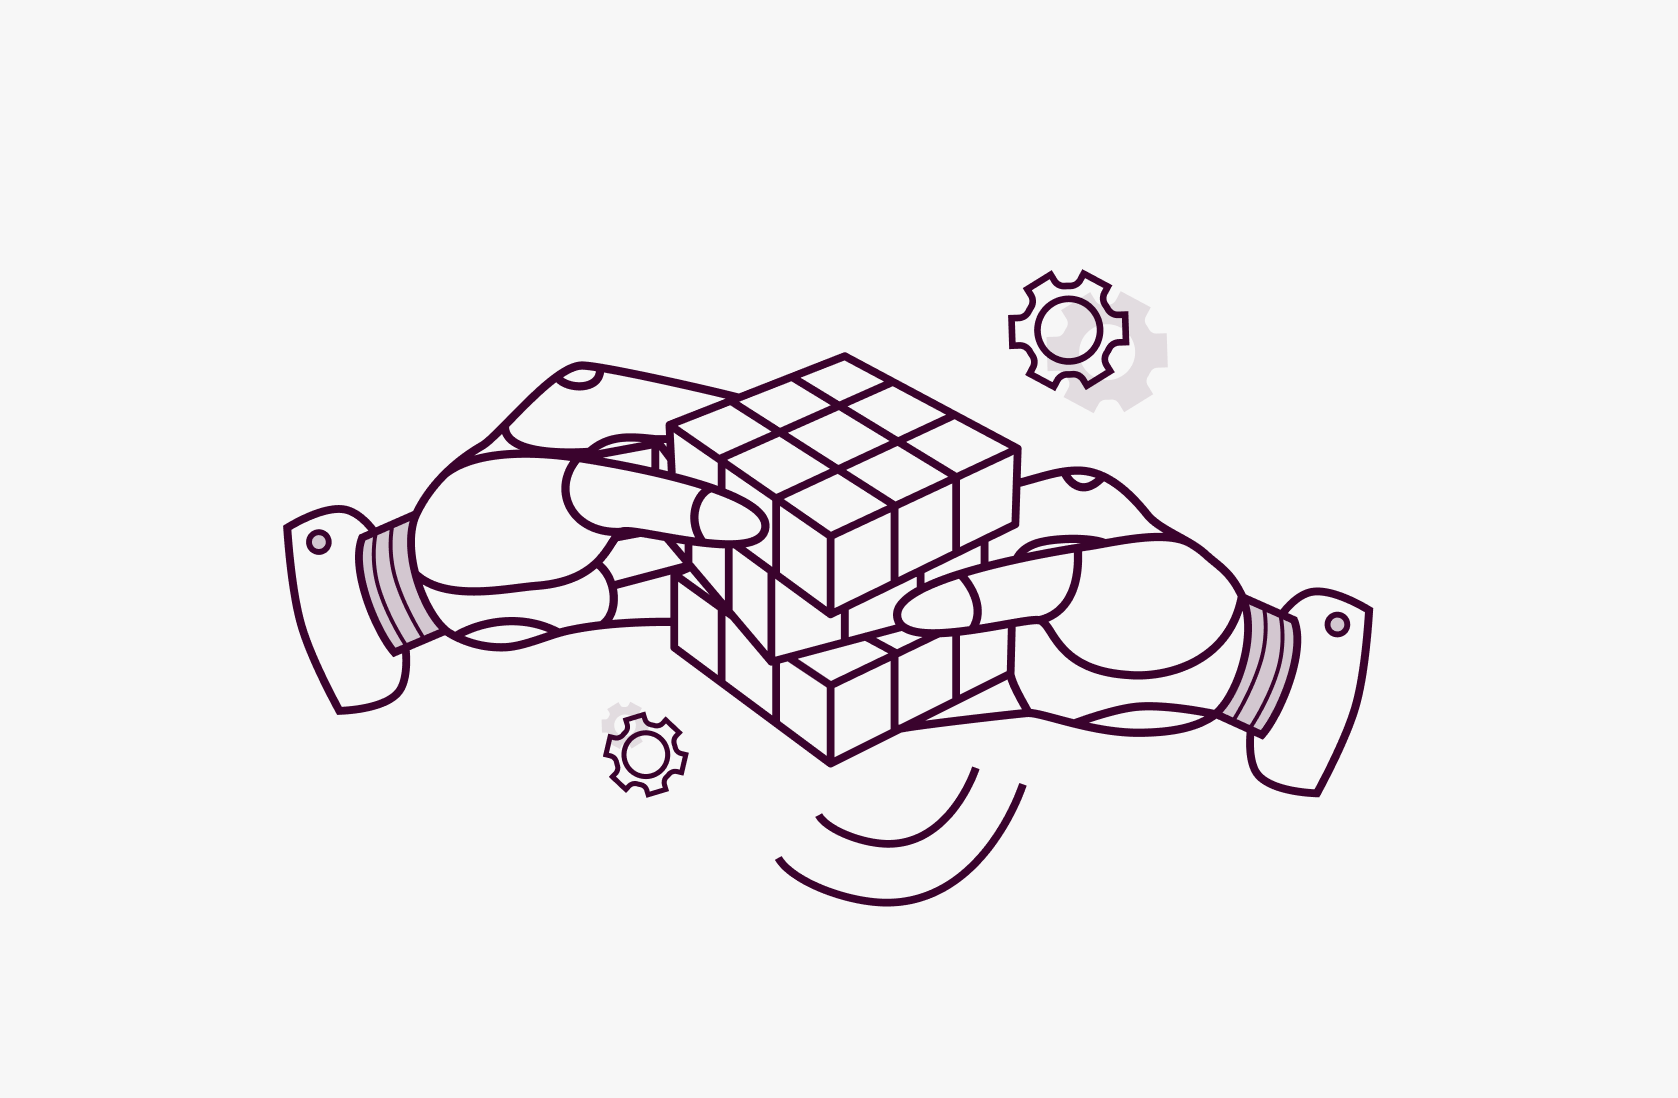 Blog - Solve with AI. Rubik's cube. Challenge